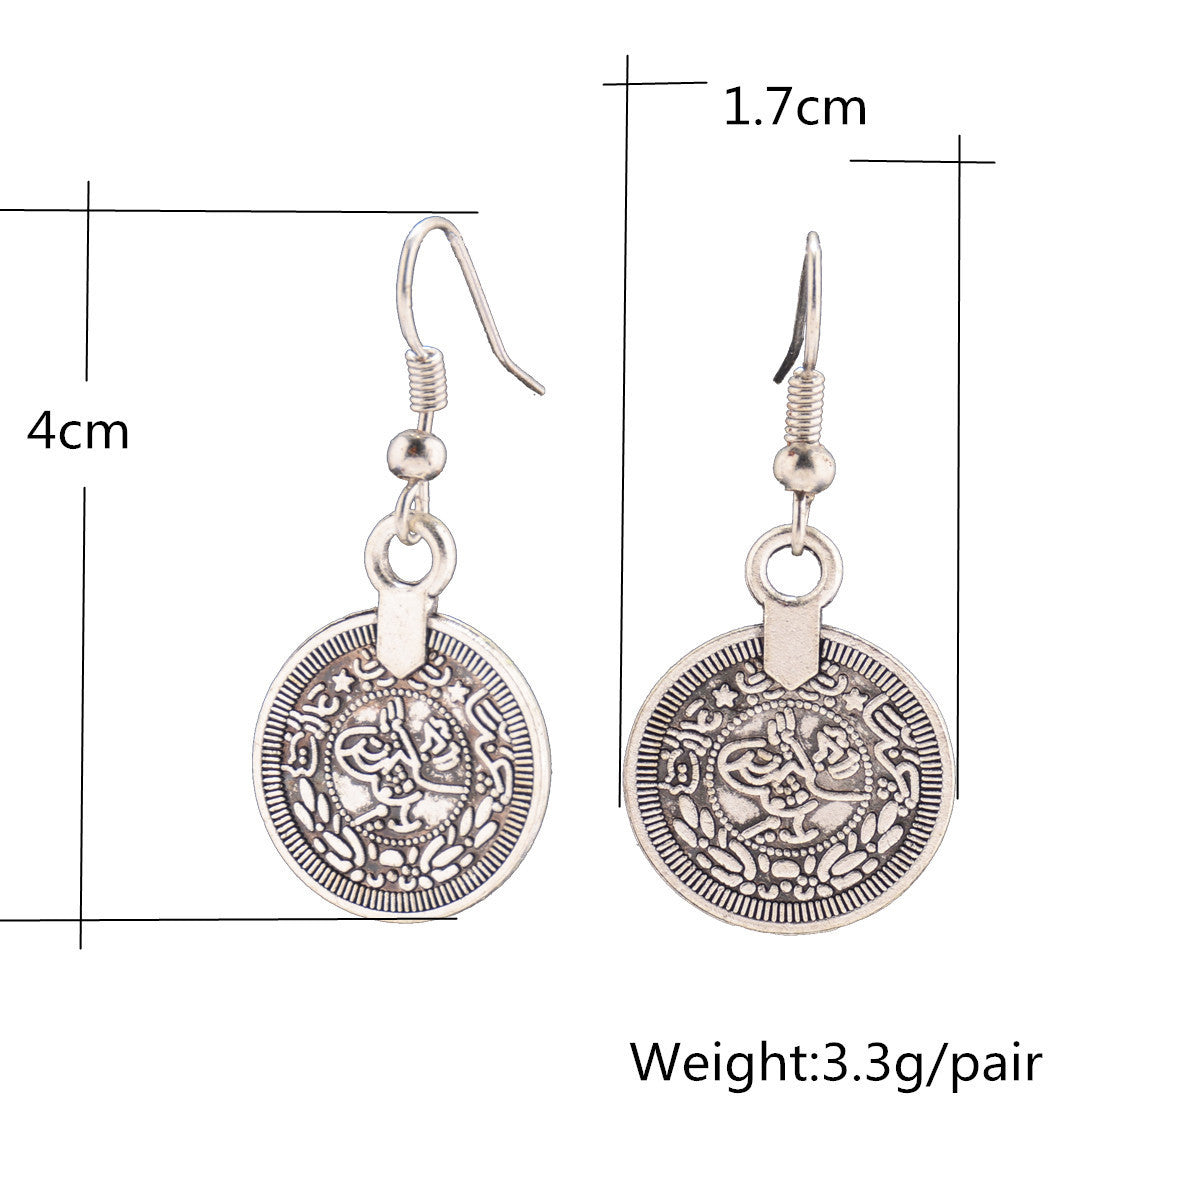 Retro Coin Tassels Earrings - Oh Yours Fashion - 4